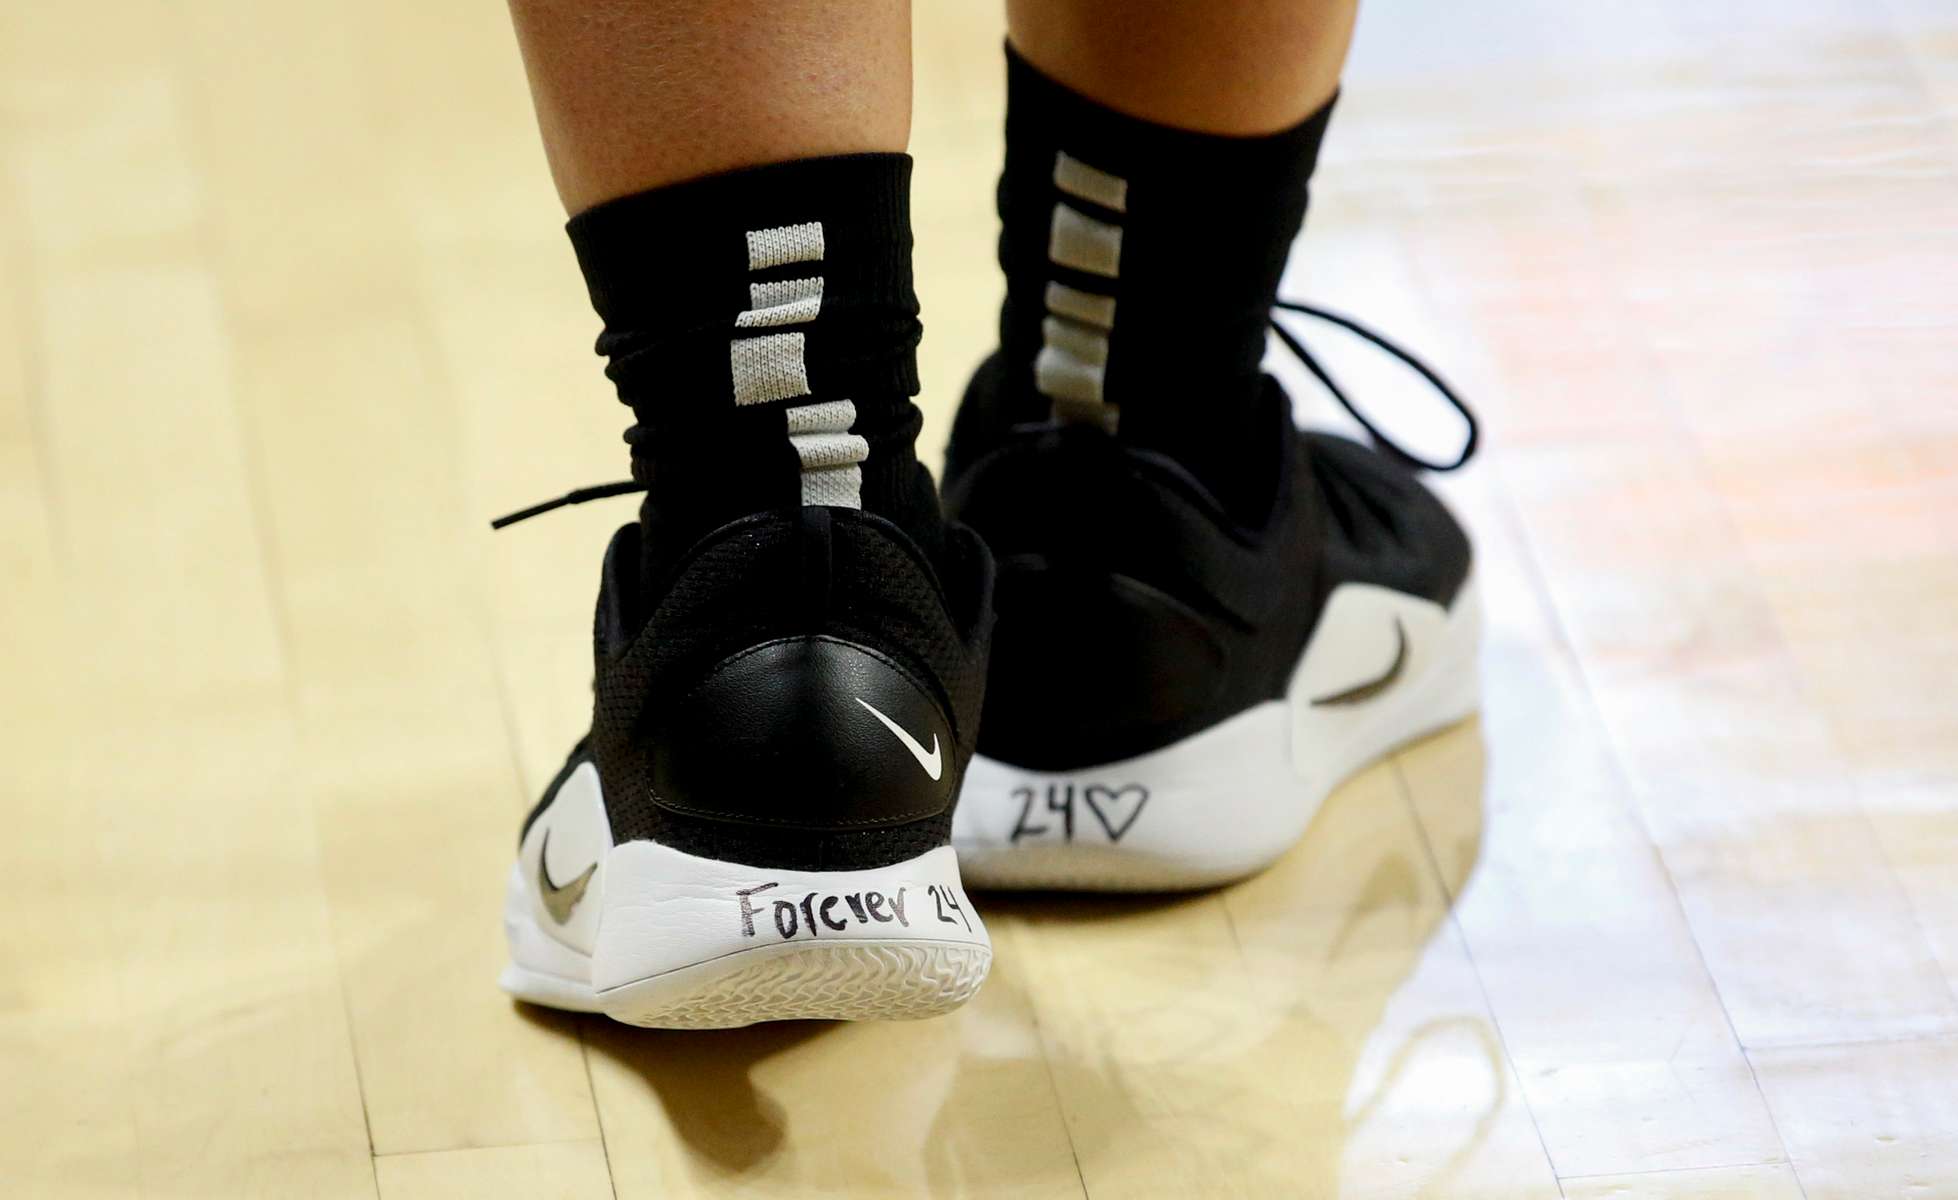 Oregon's Sabrina Ionescu paid her respects to Kobe Bryant on her shoes. Ionescu did not come out until 15 minutes before the game started at Gill Coliseum. [Andy Nelson/The Register-Guard] - registerguard.com